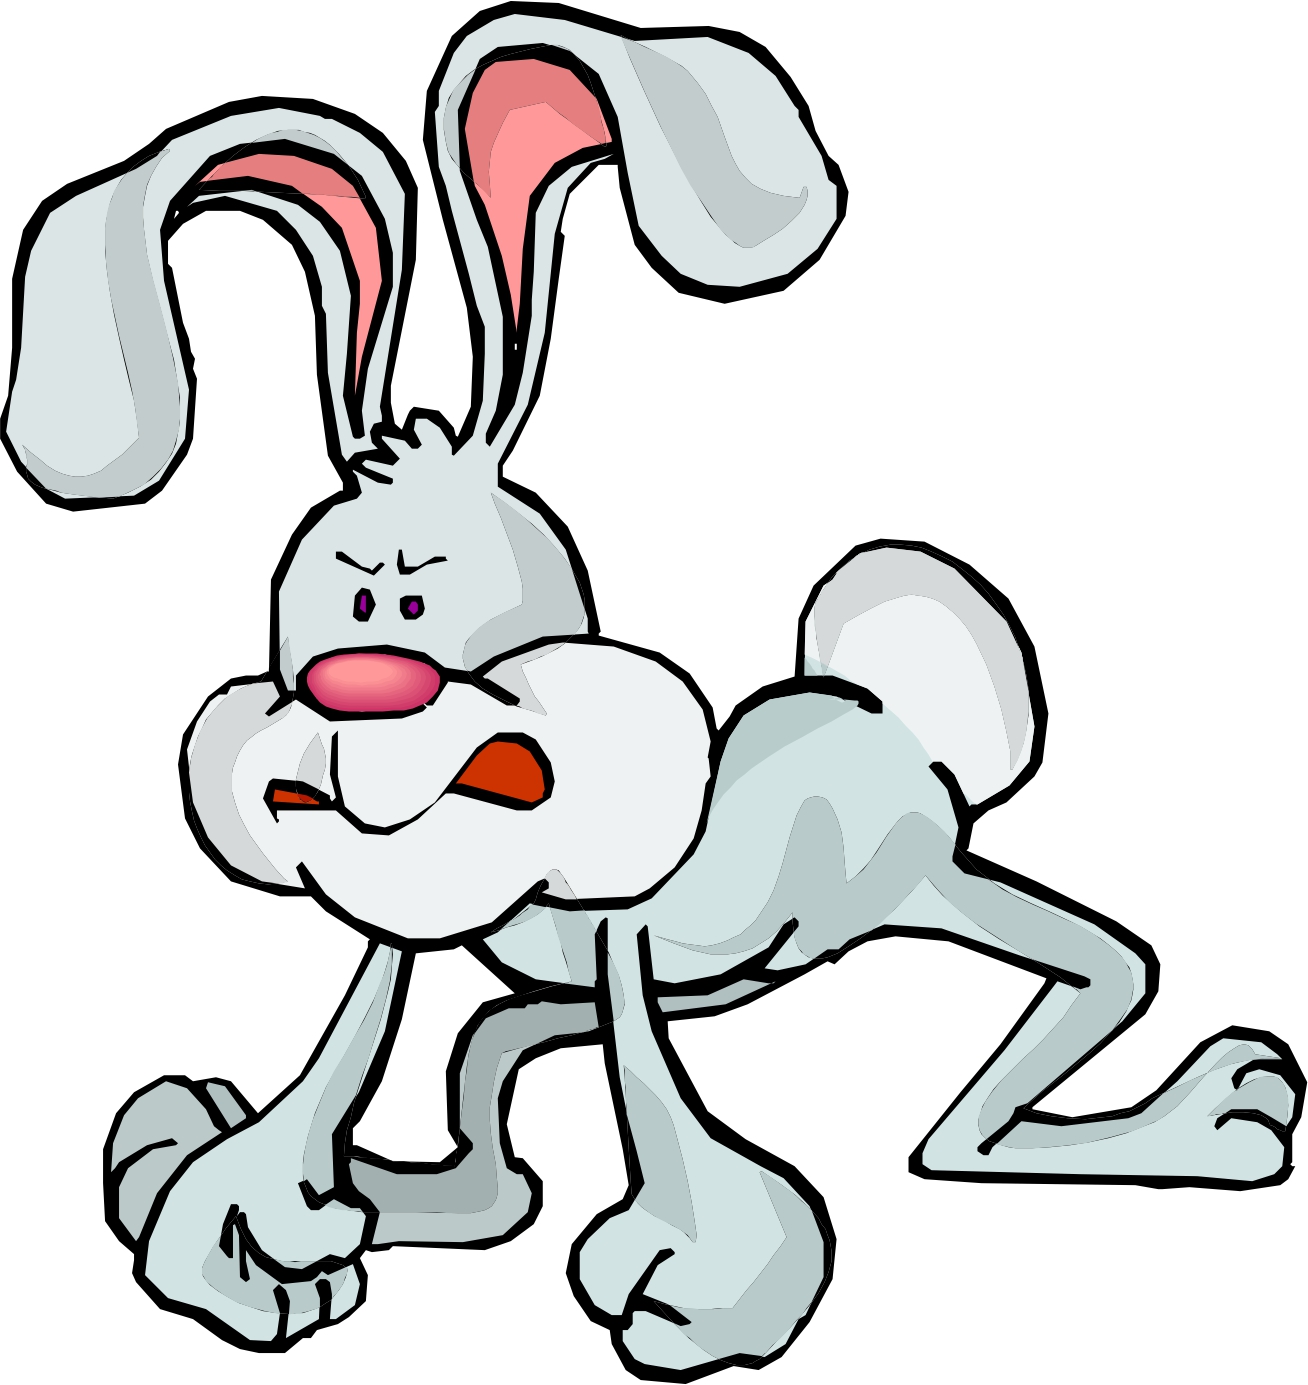 Cartoon Bunny Images | Free download on ClipArtMag